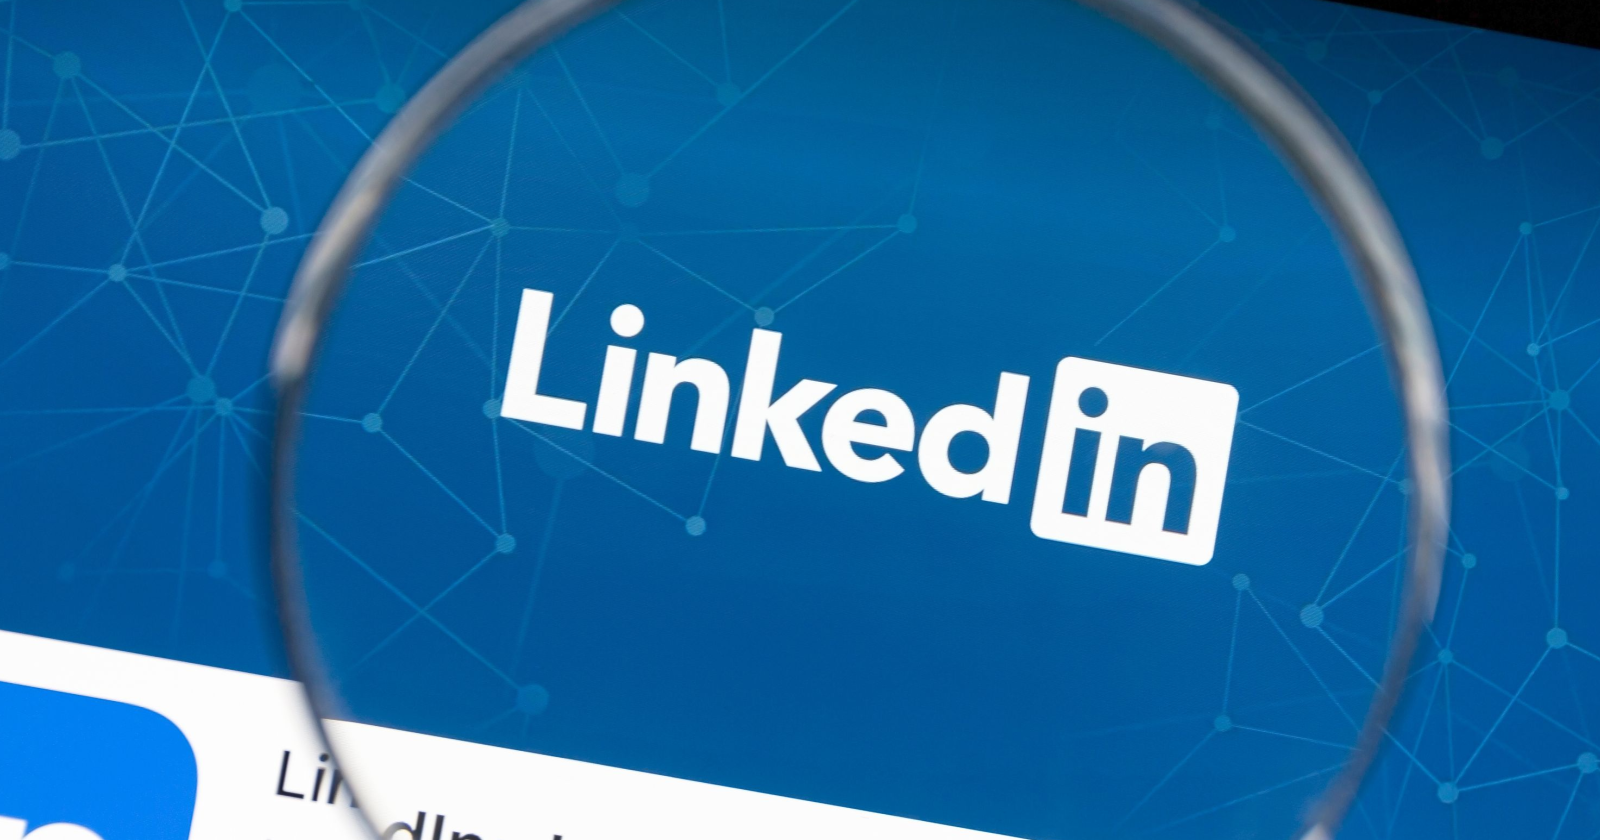 Decoding LinkedIn Recruiter: A smart investment or not?